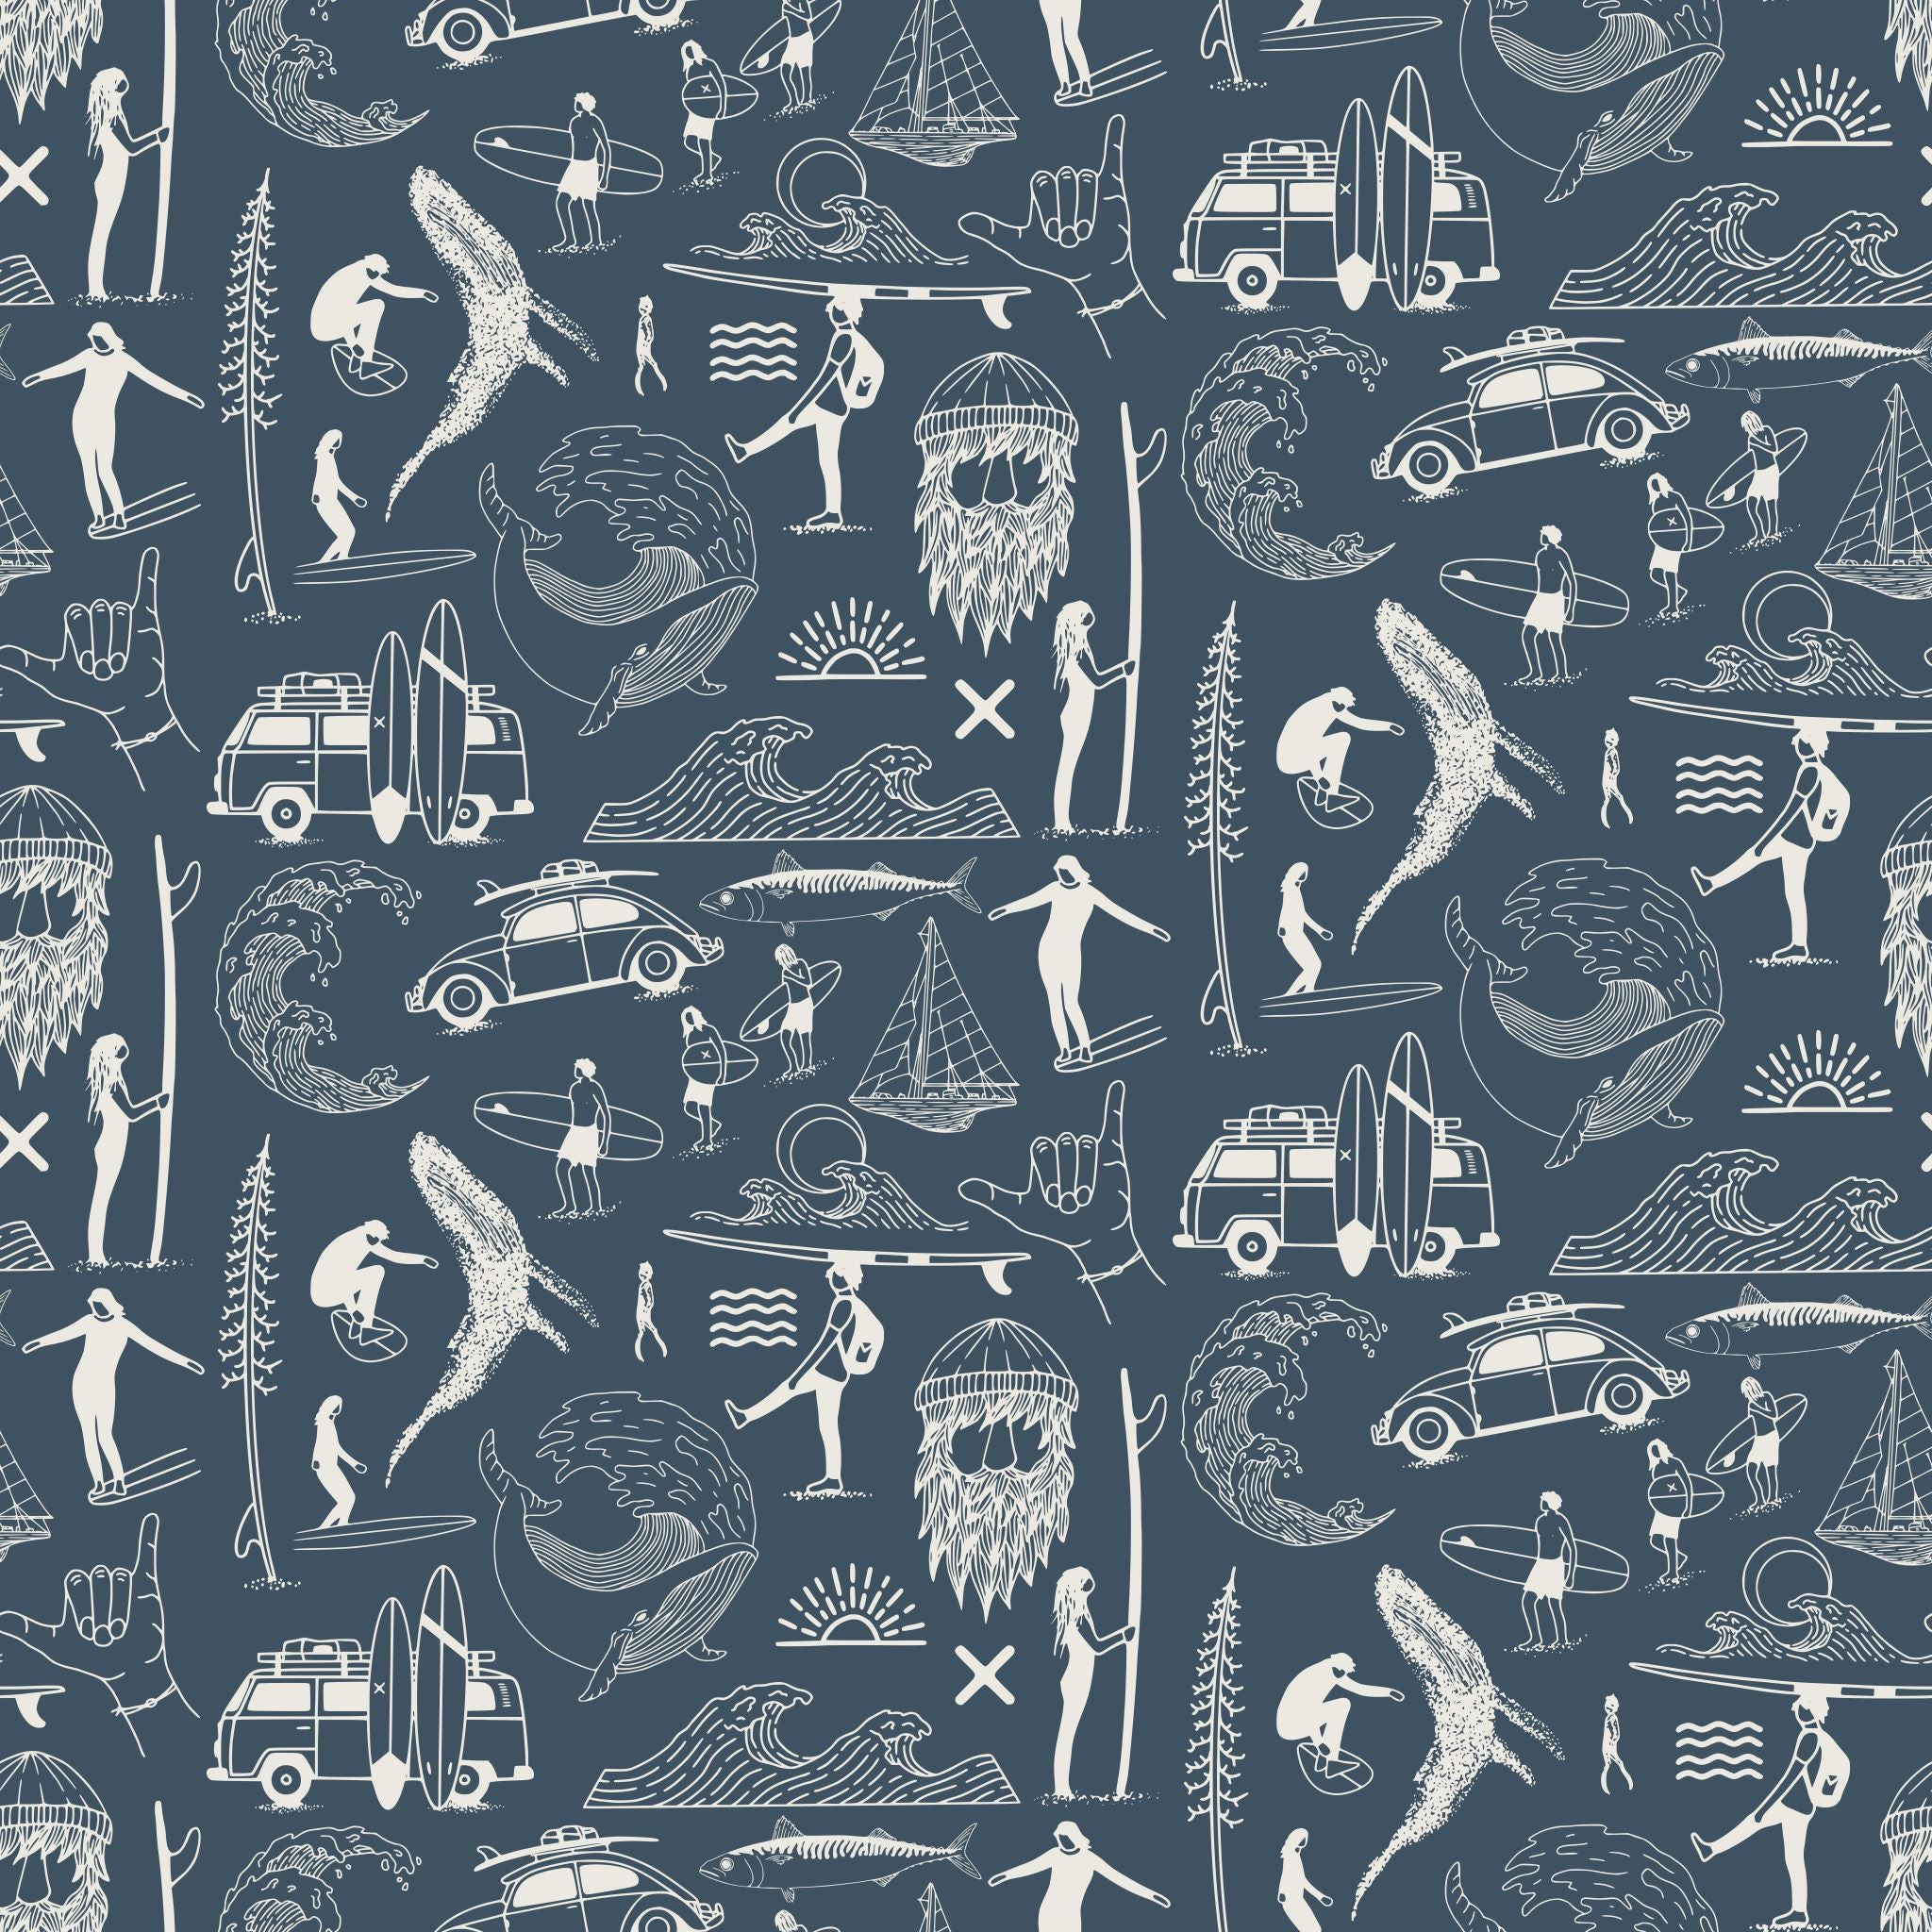 "Saltwater Surf (Blue) Wallpaper by Wall Blush adorning a stylish bedroom, depicting surfing and beach life."